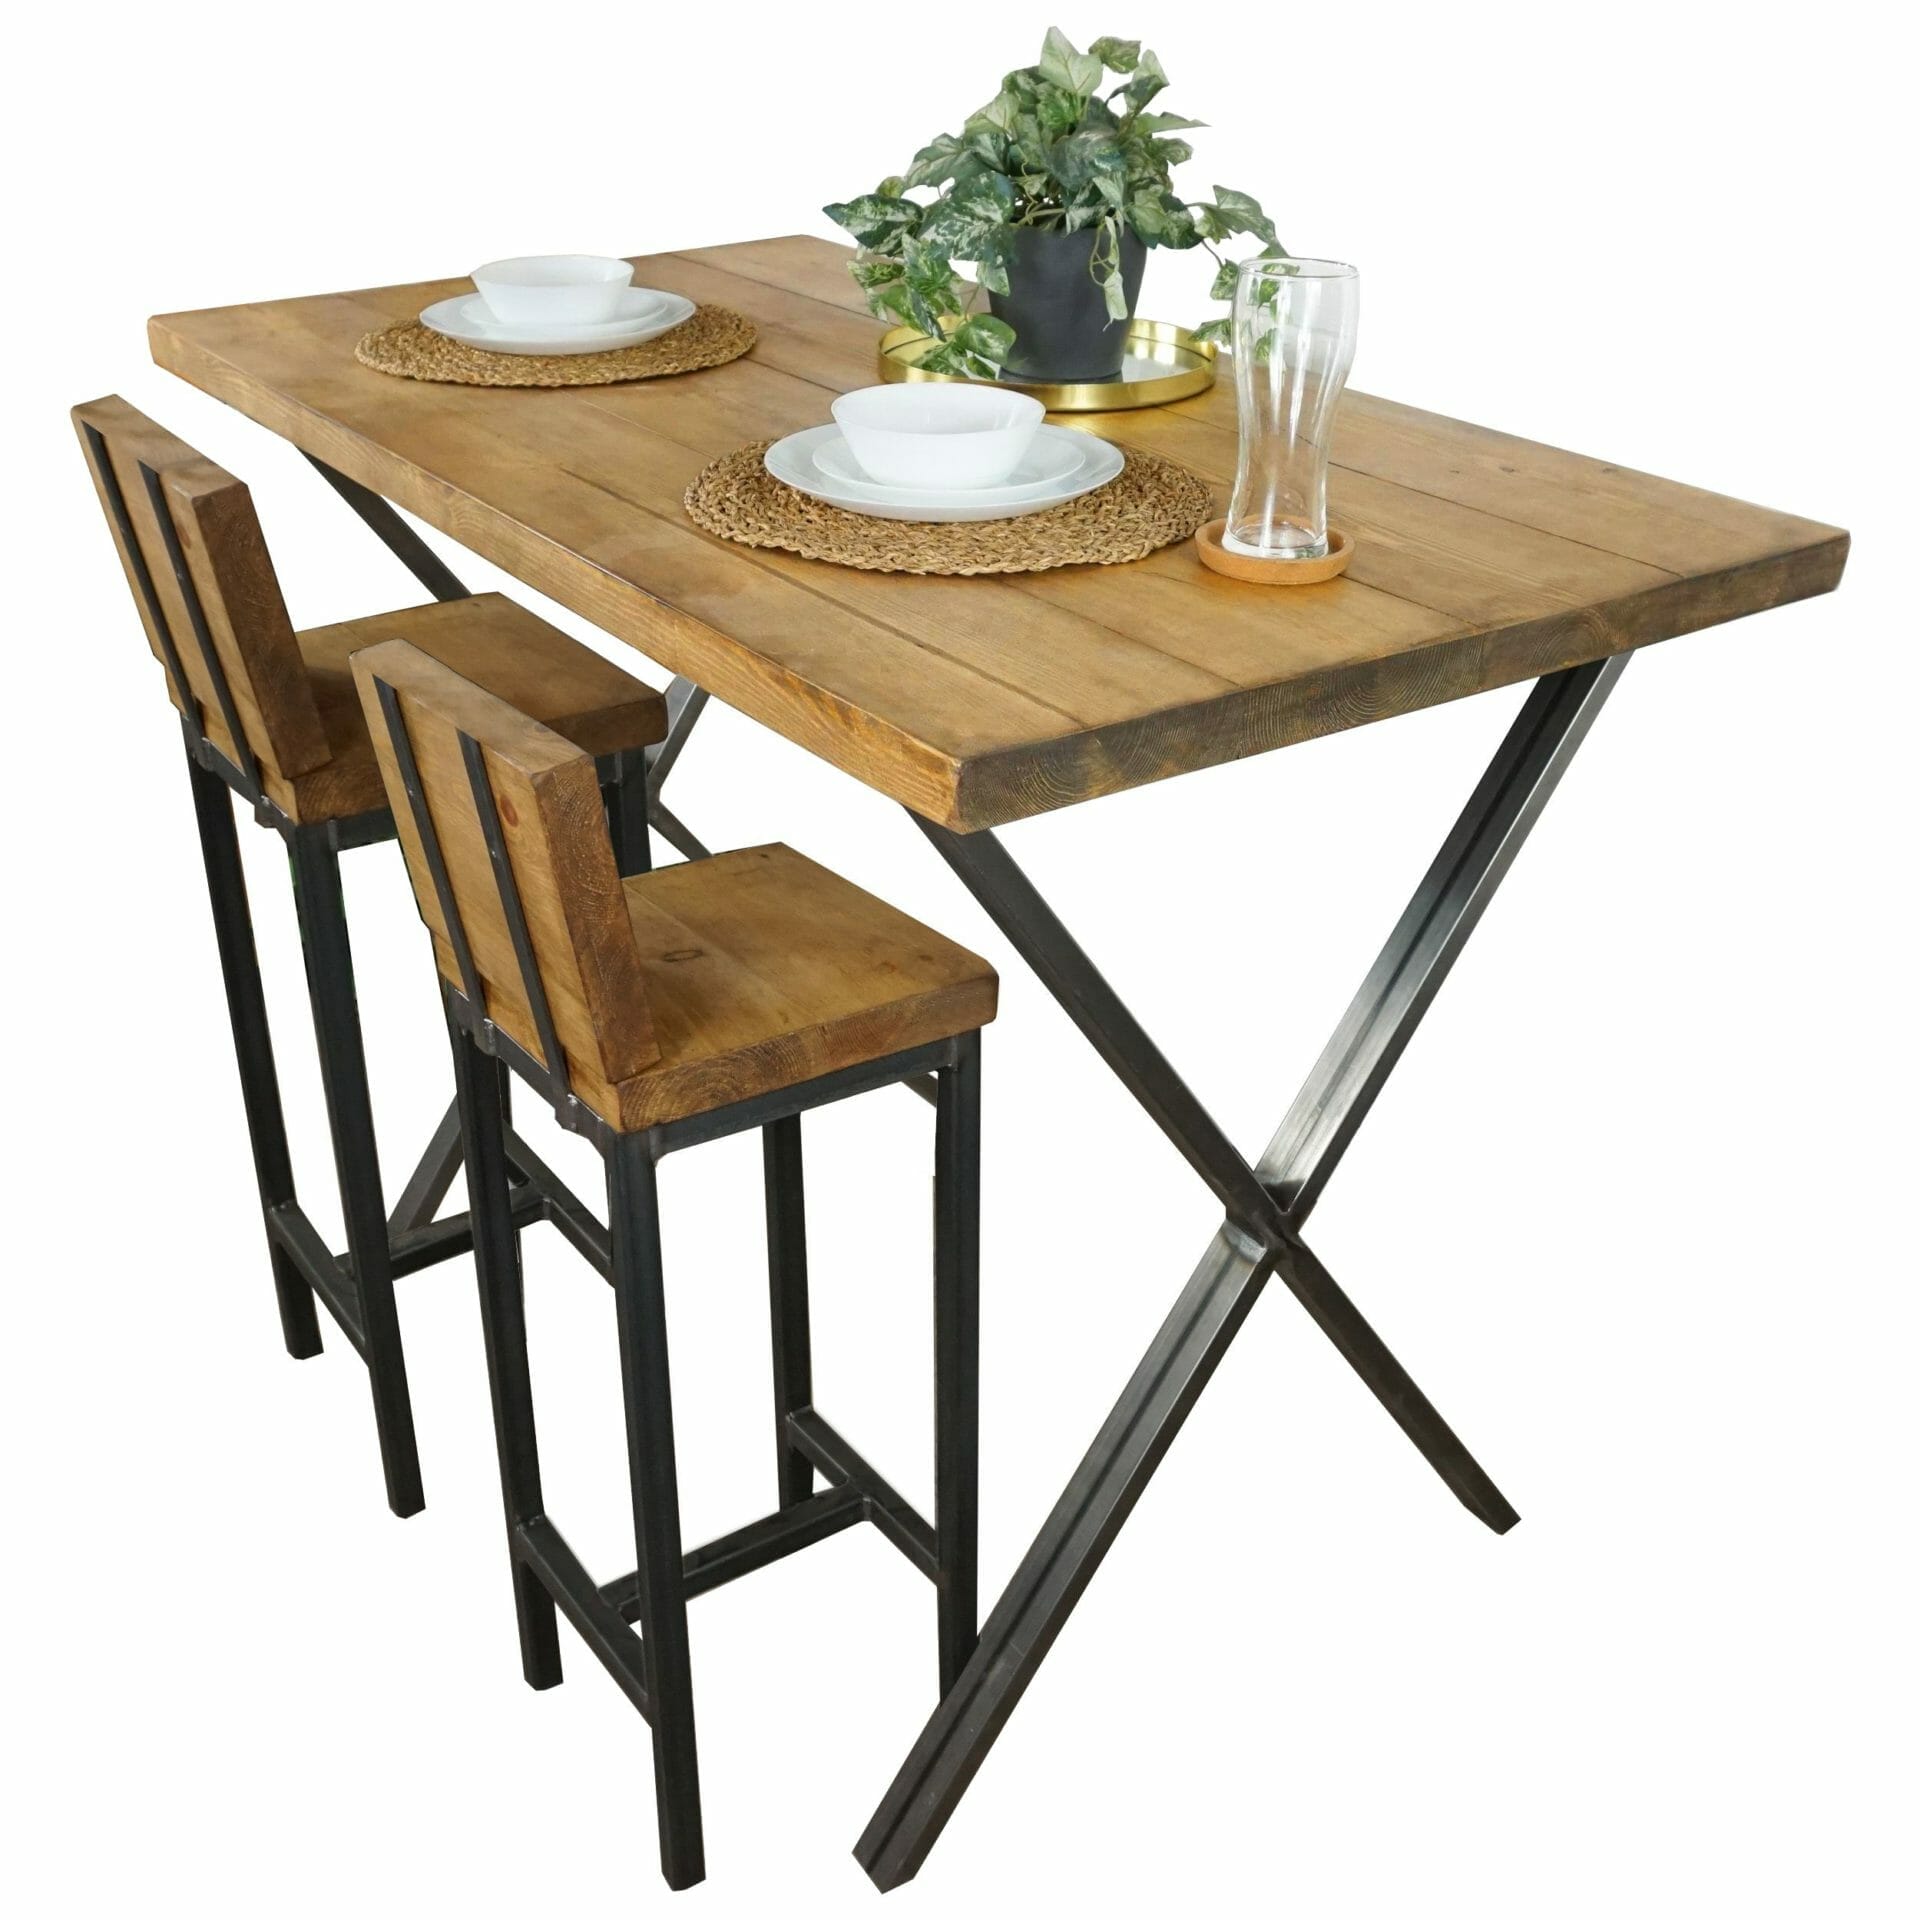 handmade tall reclaimed wood table with steel legs and matching chairs